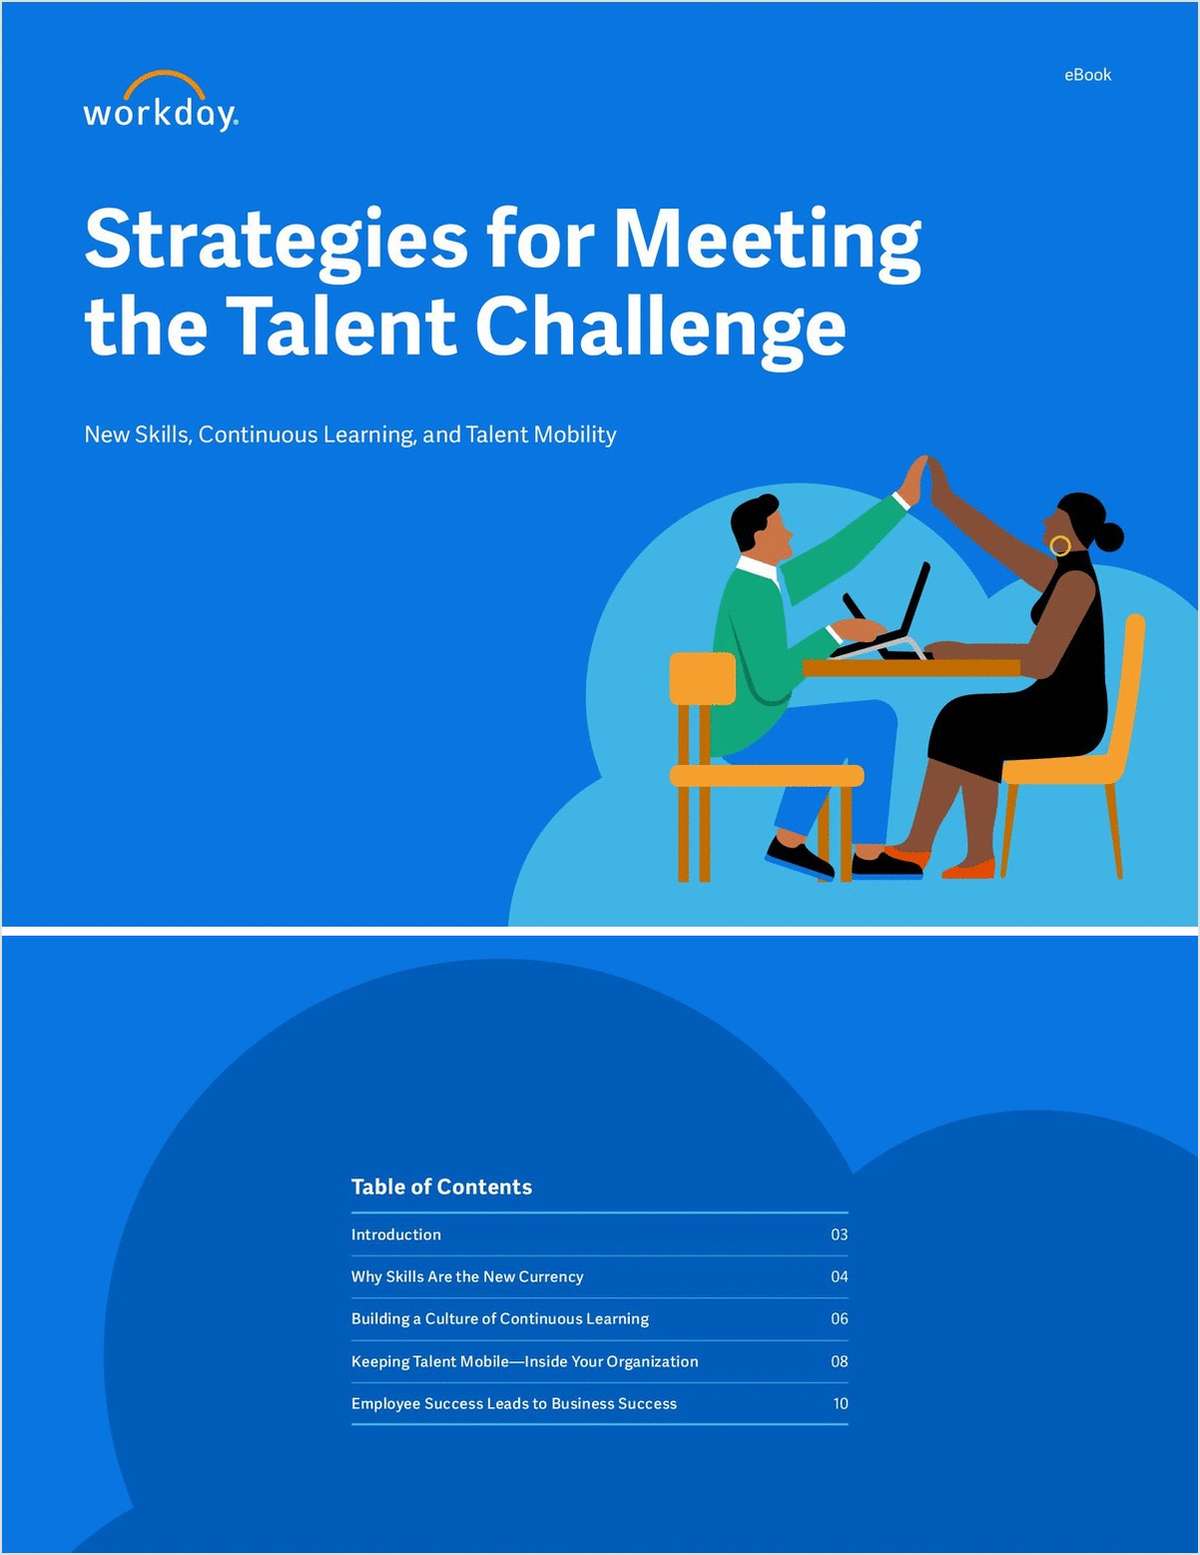 Strategies for Meeting the Talent Challenge - new skills, continuous learning and talent mobility